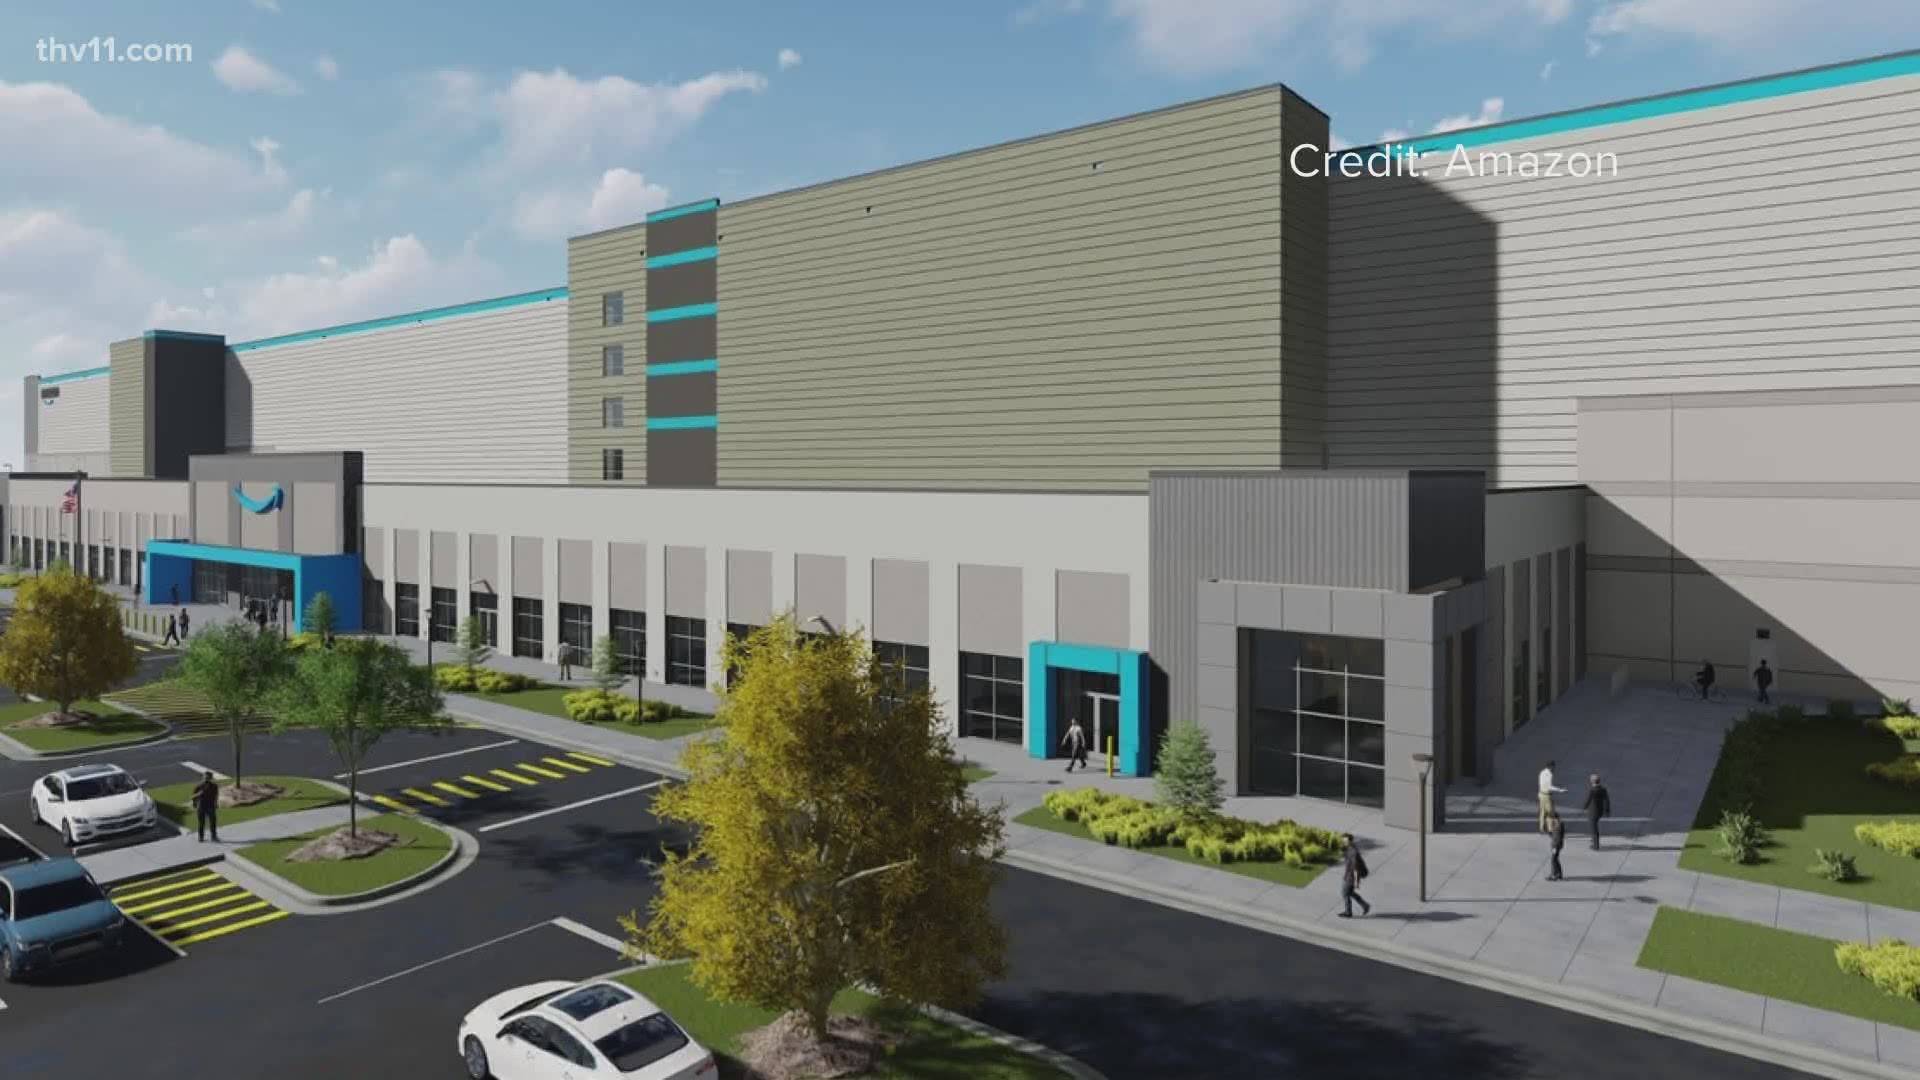 Amazon has announced plans to open its first fulfillment center in Little Rock.